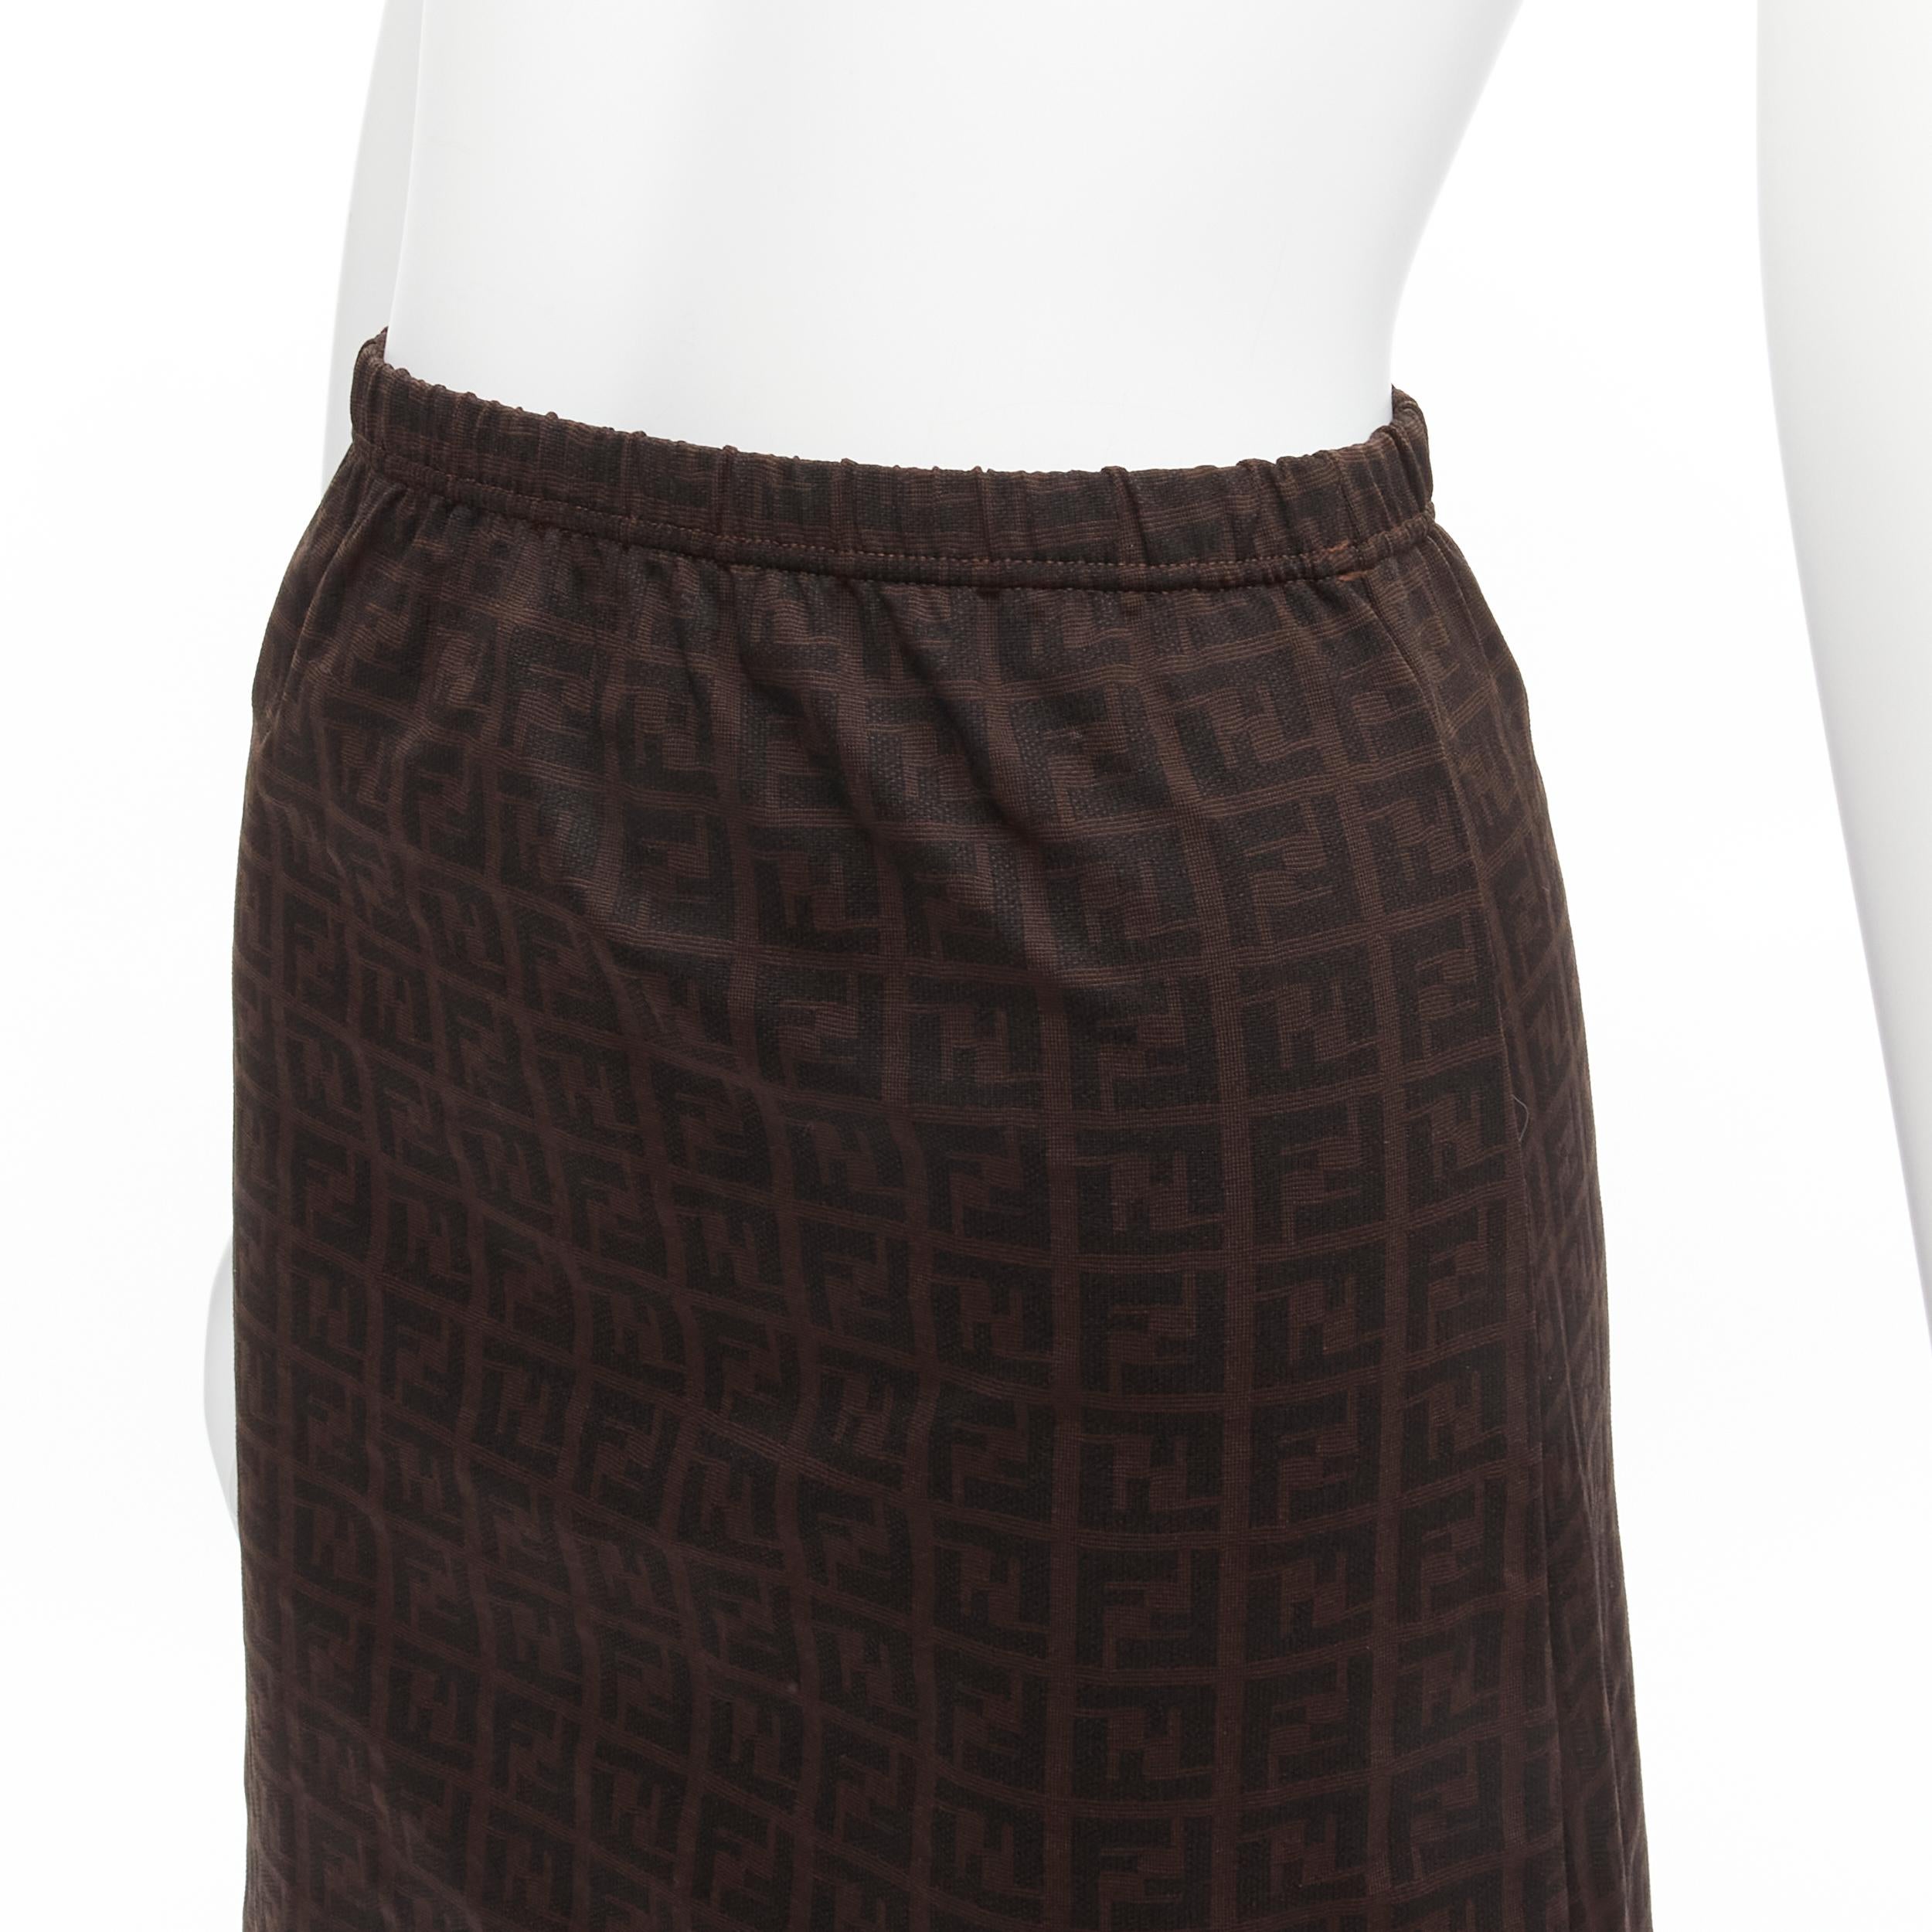 FENDI MARE Vintage brown FF Zucca logo monogram A-line skirt IT42 M
Reference: CNLE/A00211
Brand: Fendi
Collection: Mare
Material: Polyamide, Blend
Color: Brown
Pattern: Monogram
Closure: Elasticated
Extra Details: Elasticated waistband.
Made in: